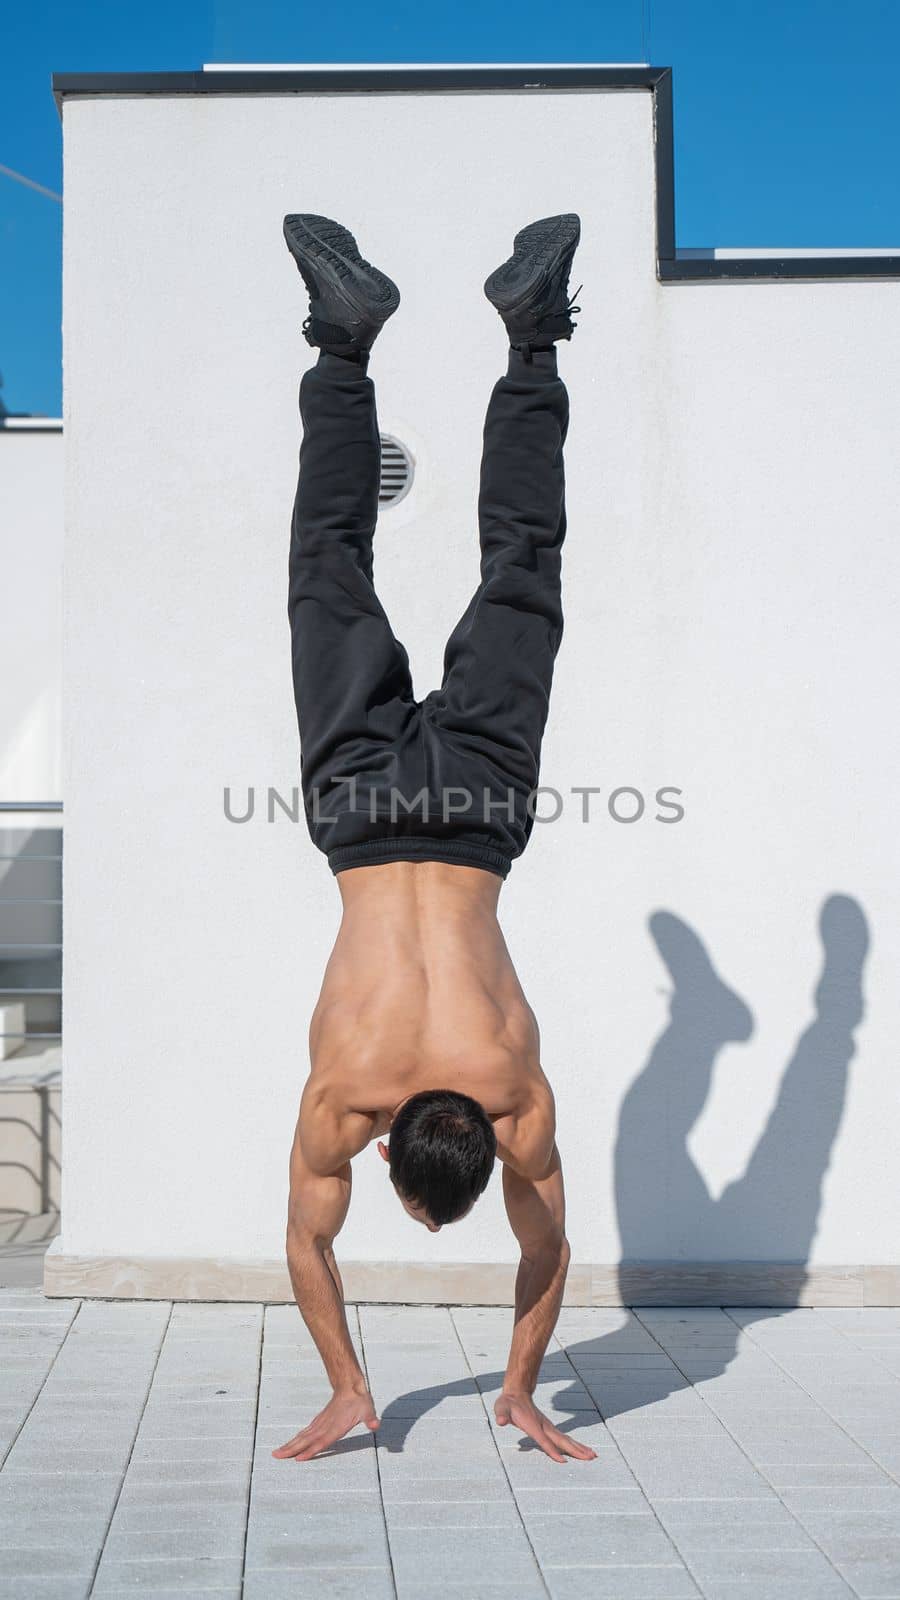 Man doing a handstand outdoors against a white wall